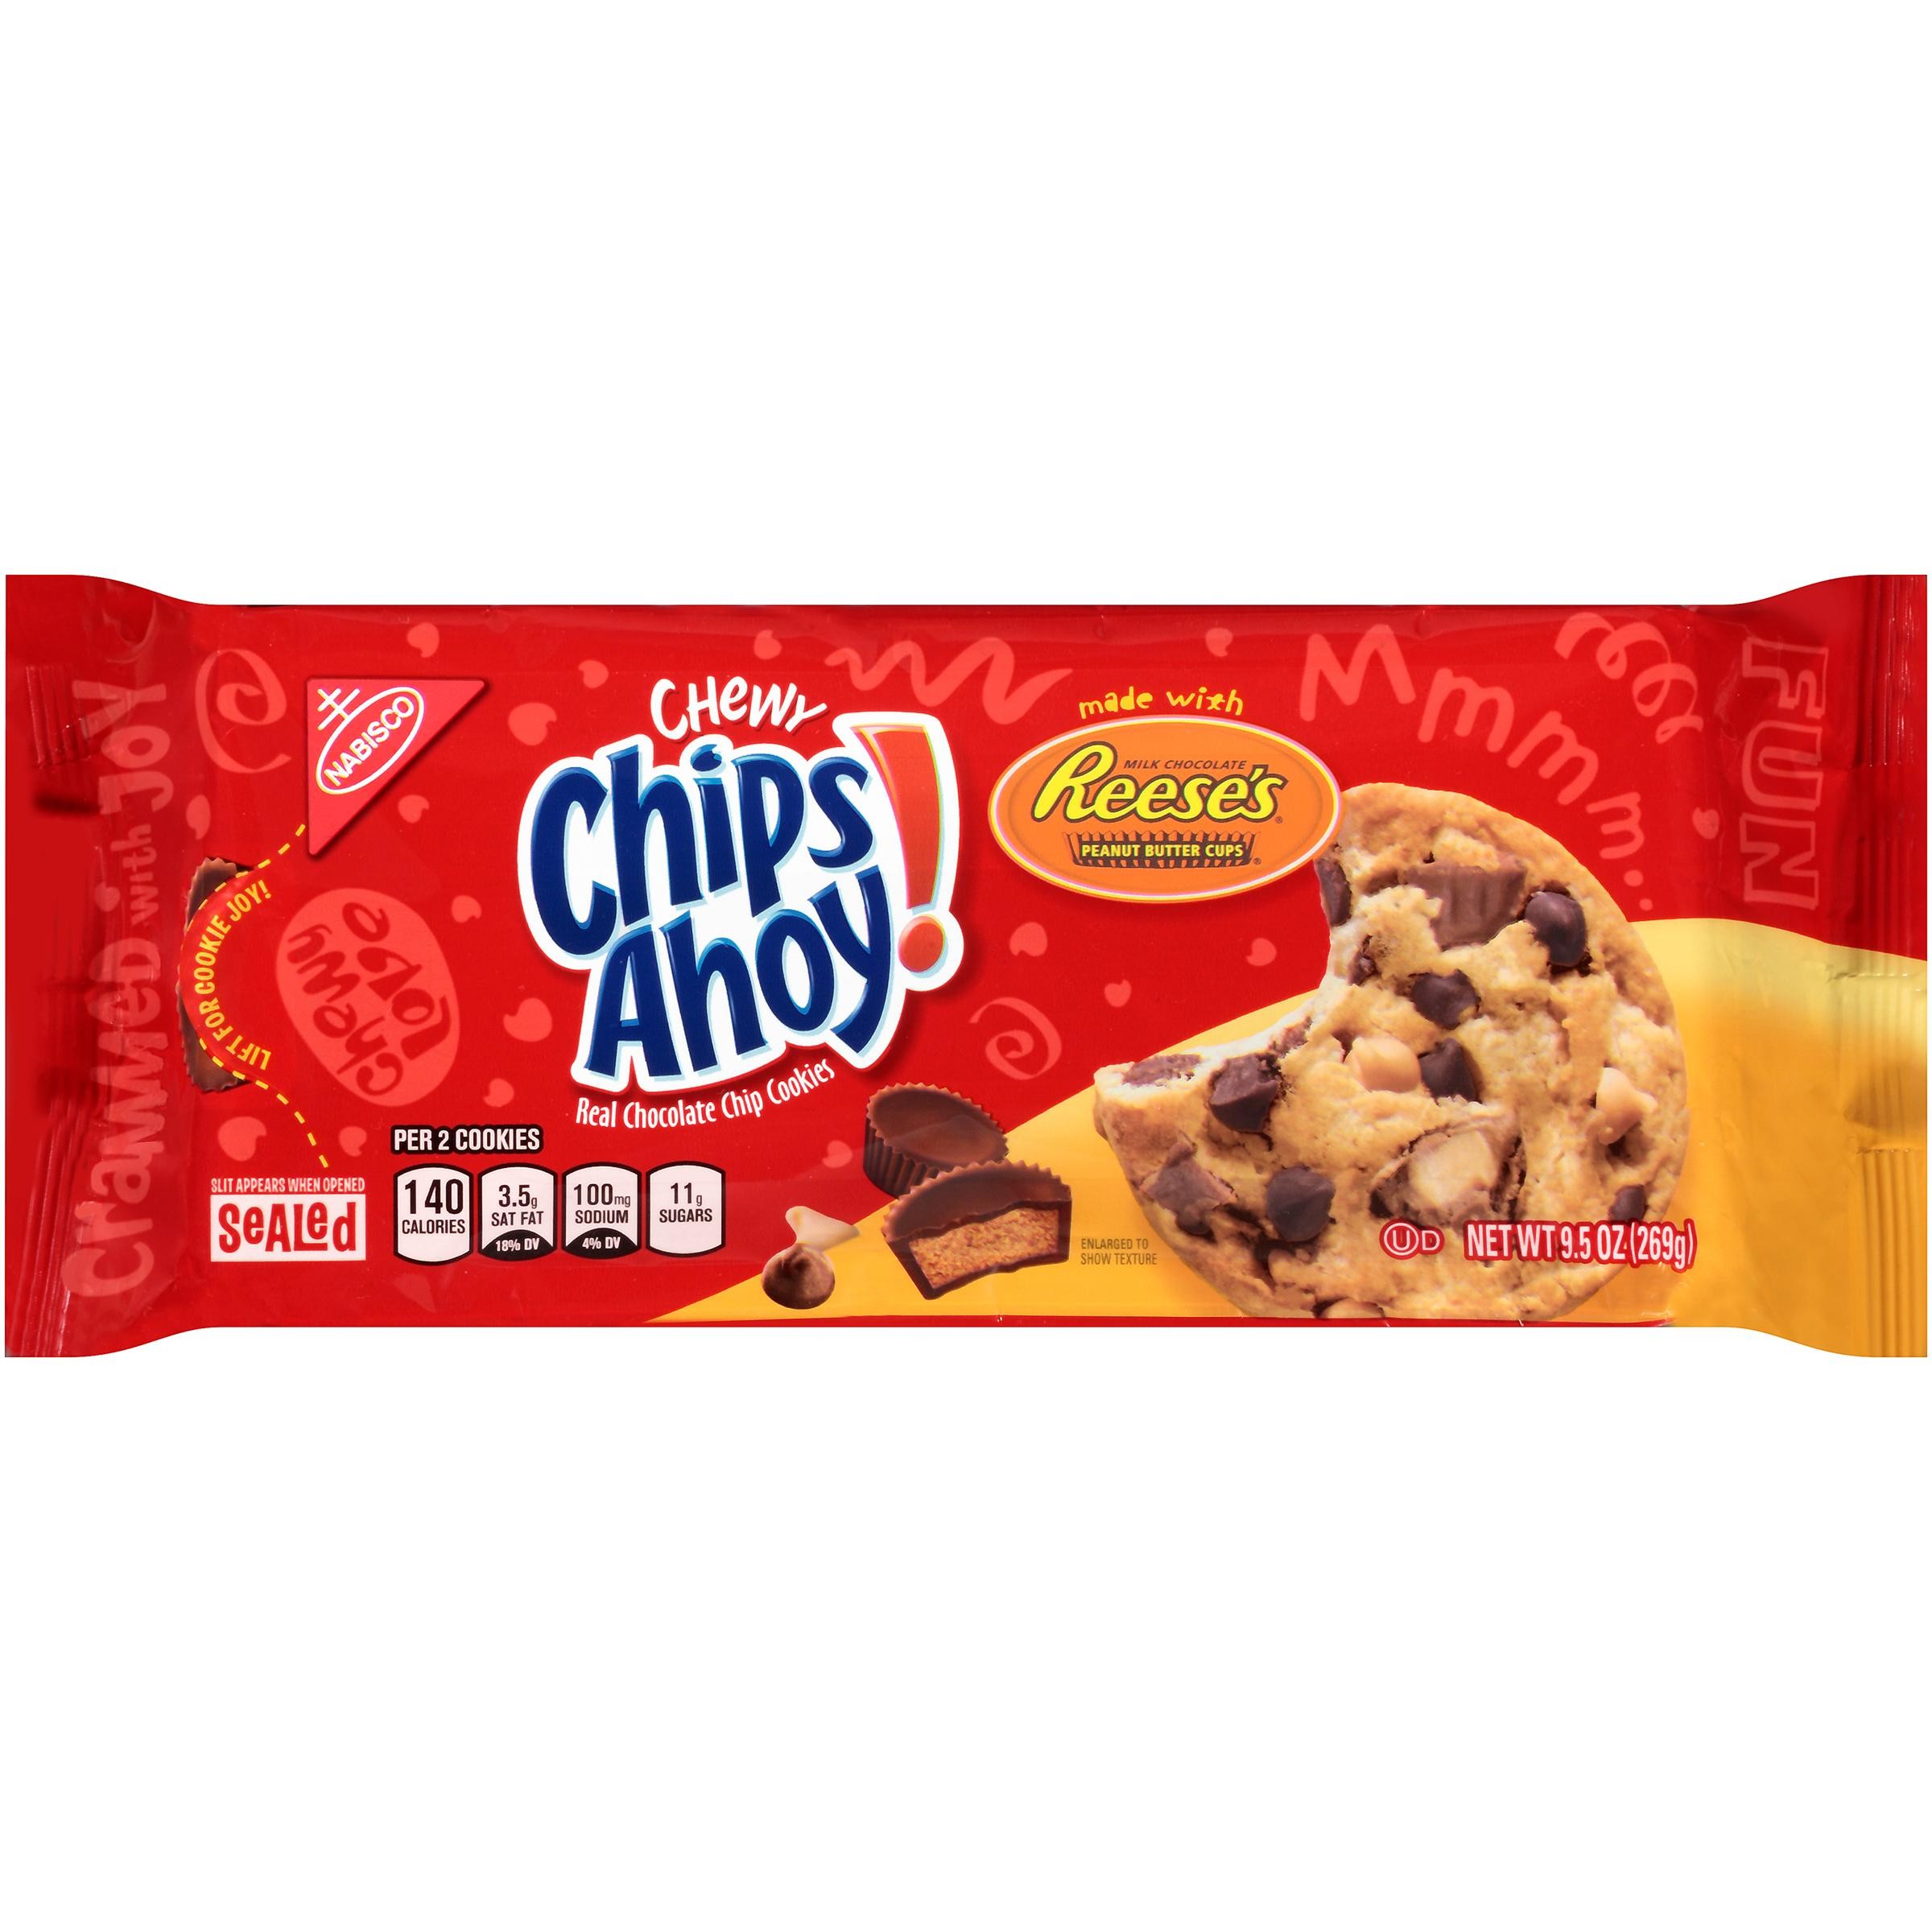 Chips Ahoy Chewy Chocolate Chip Cookies with Reeses Peanut Butter Cups - 9.5 Oz